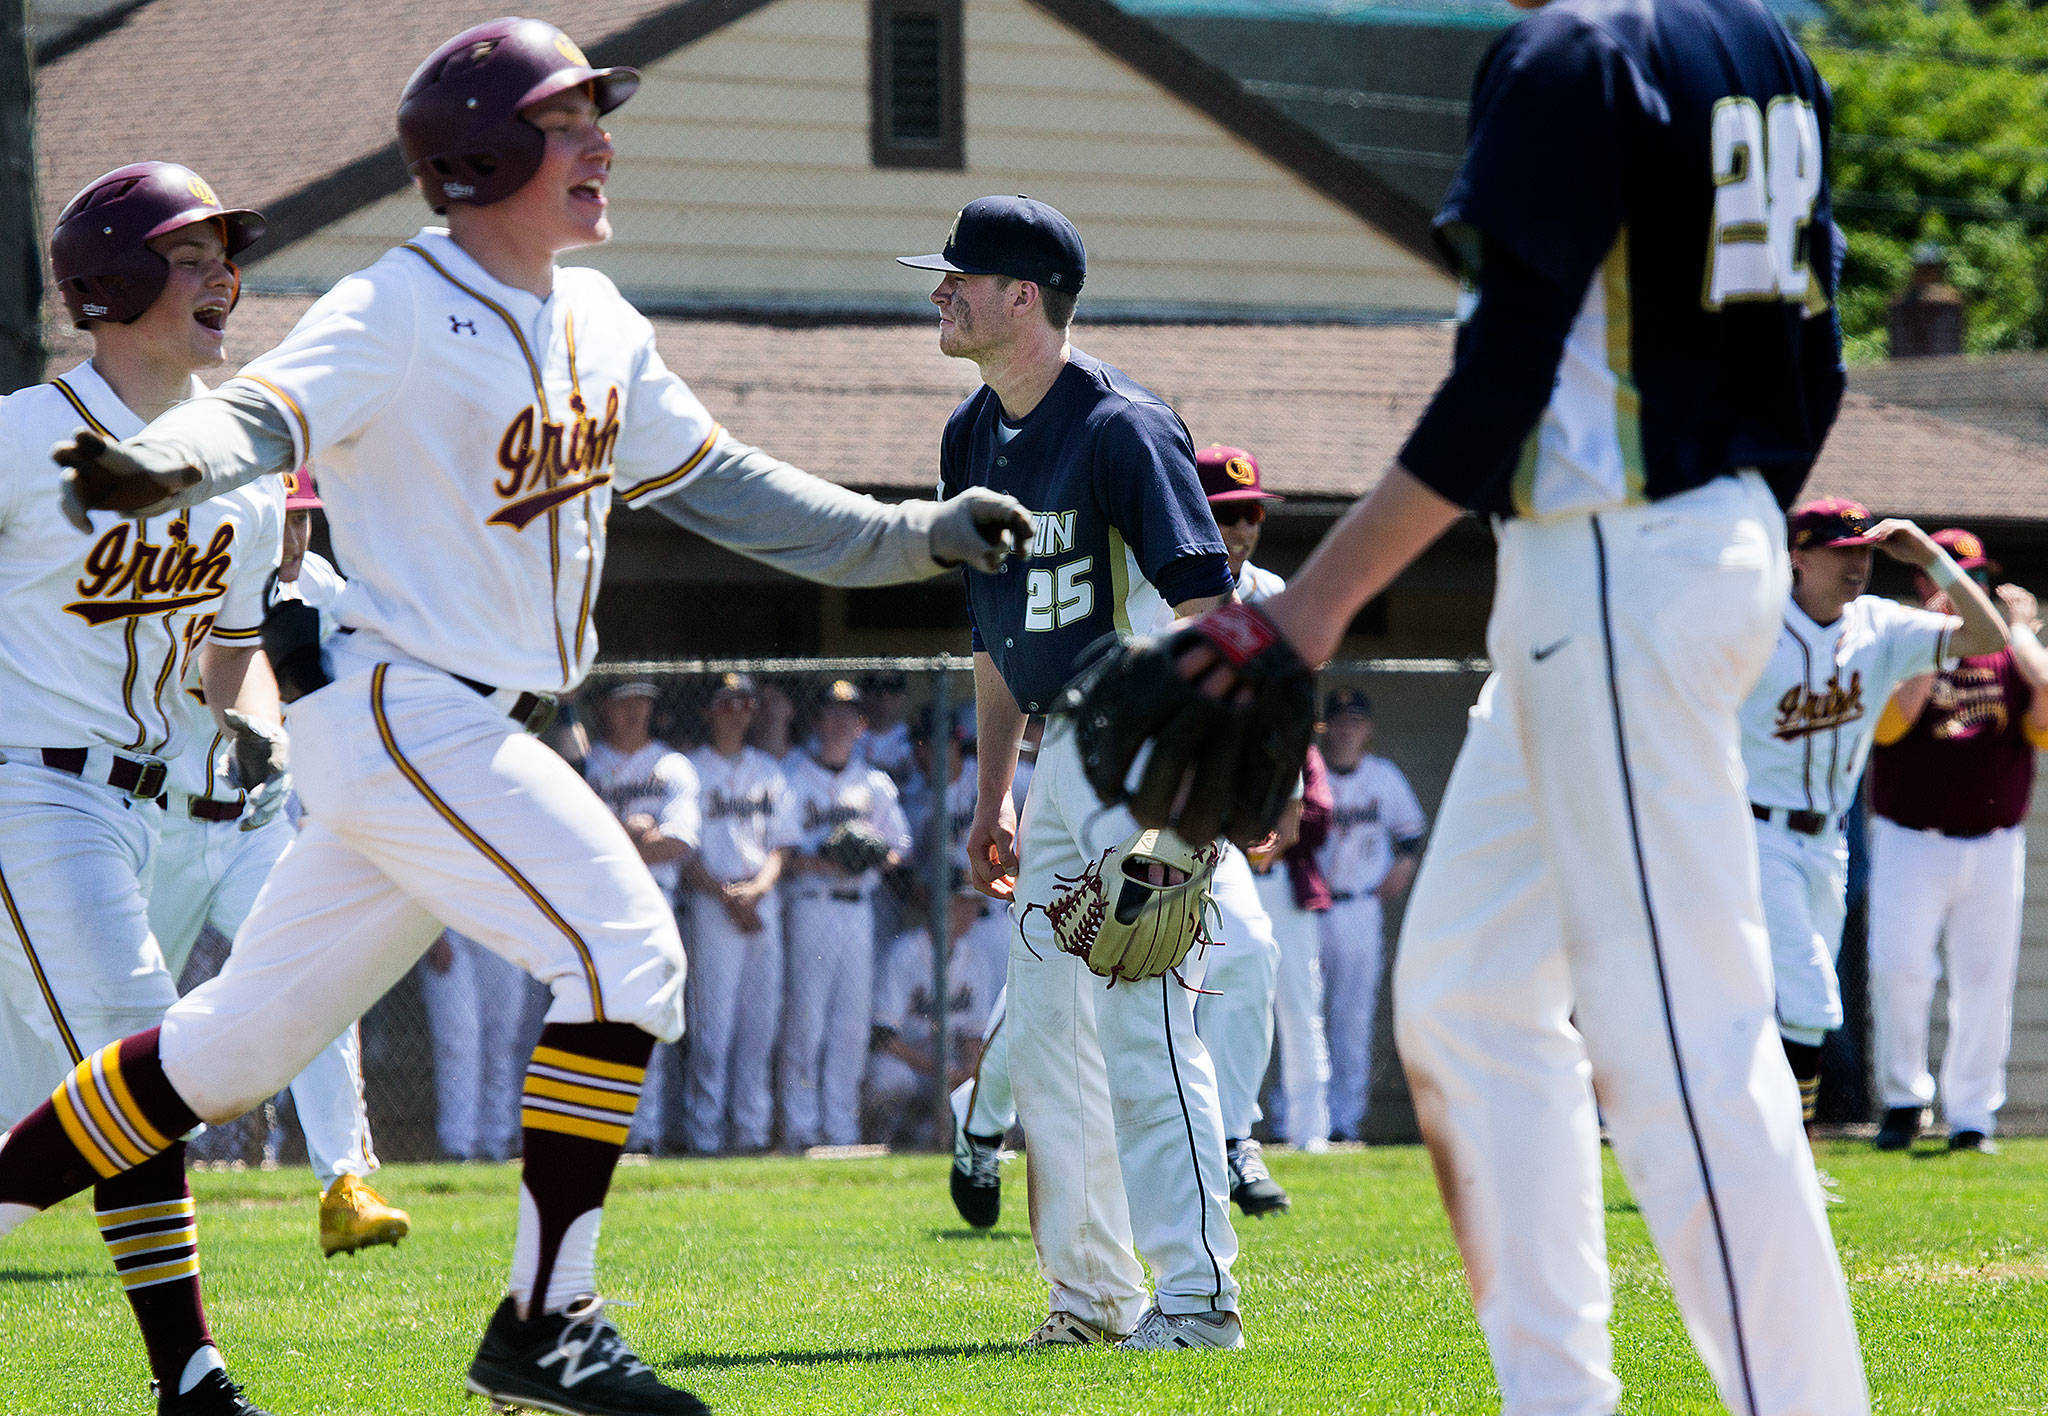 Arlington’s Cameron Smith (25) walks off the field as O’Dea players celebrate their 7-6 win in a Class 3A state regional Saturday at Sherman Anderson Field in Mount Vernon. The Eagles’ victory-filled season ended with the walk-off loss. (Andy Bronson / The Herald)